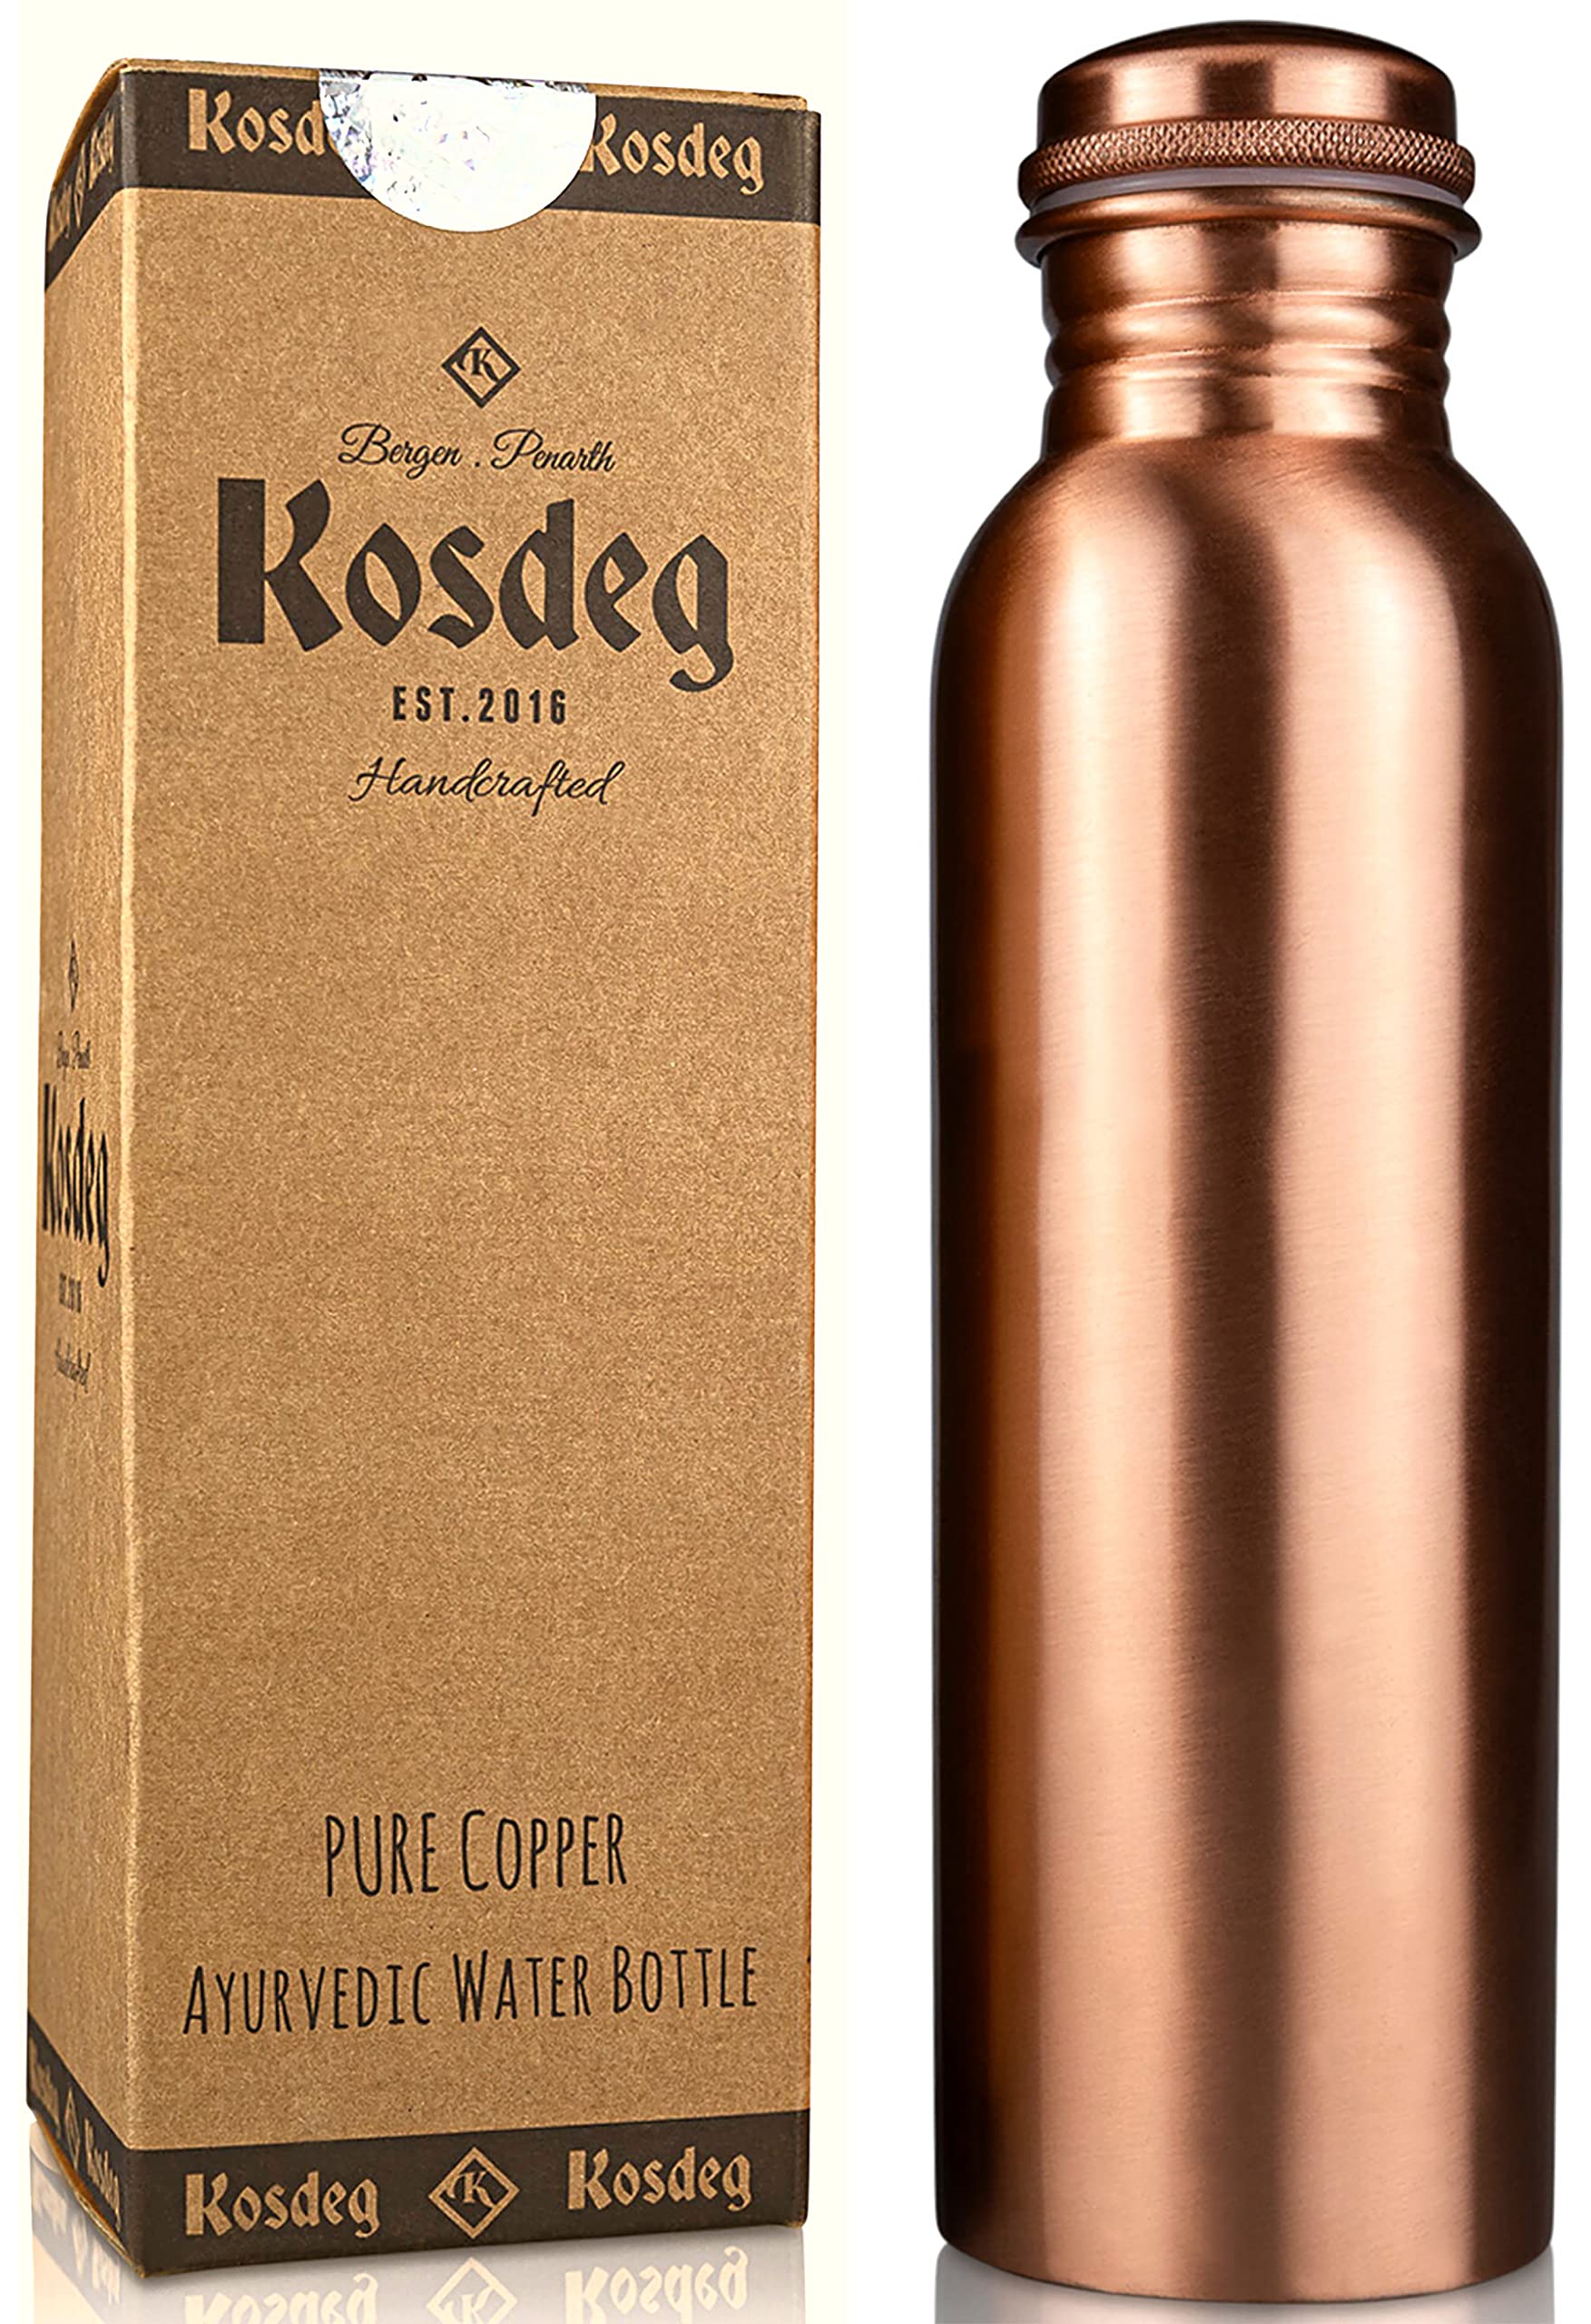 Kosdeg Copper Water Bottle 1 Liter / 34 Oz Extra Large - An Ayurvedic Pure Copper Vessel - Drink More Water, Lower Your Sugar Intake And Enjoy The Health Benefits Immediately